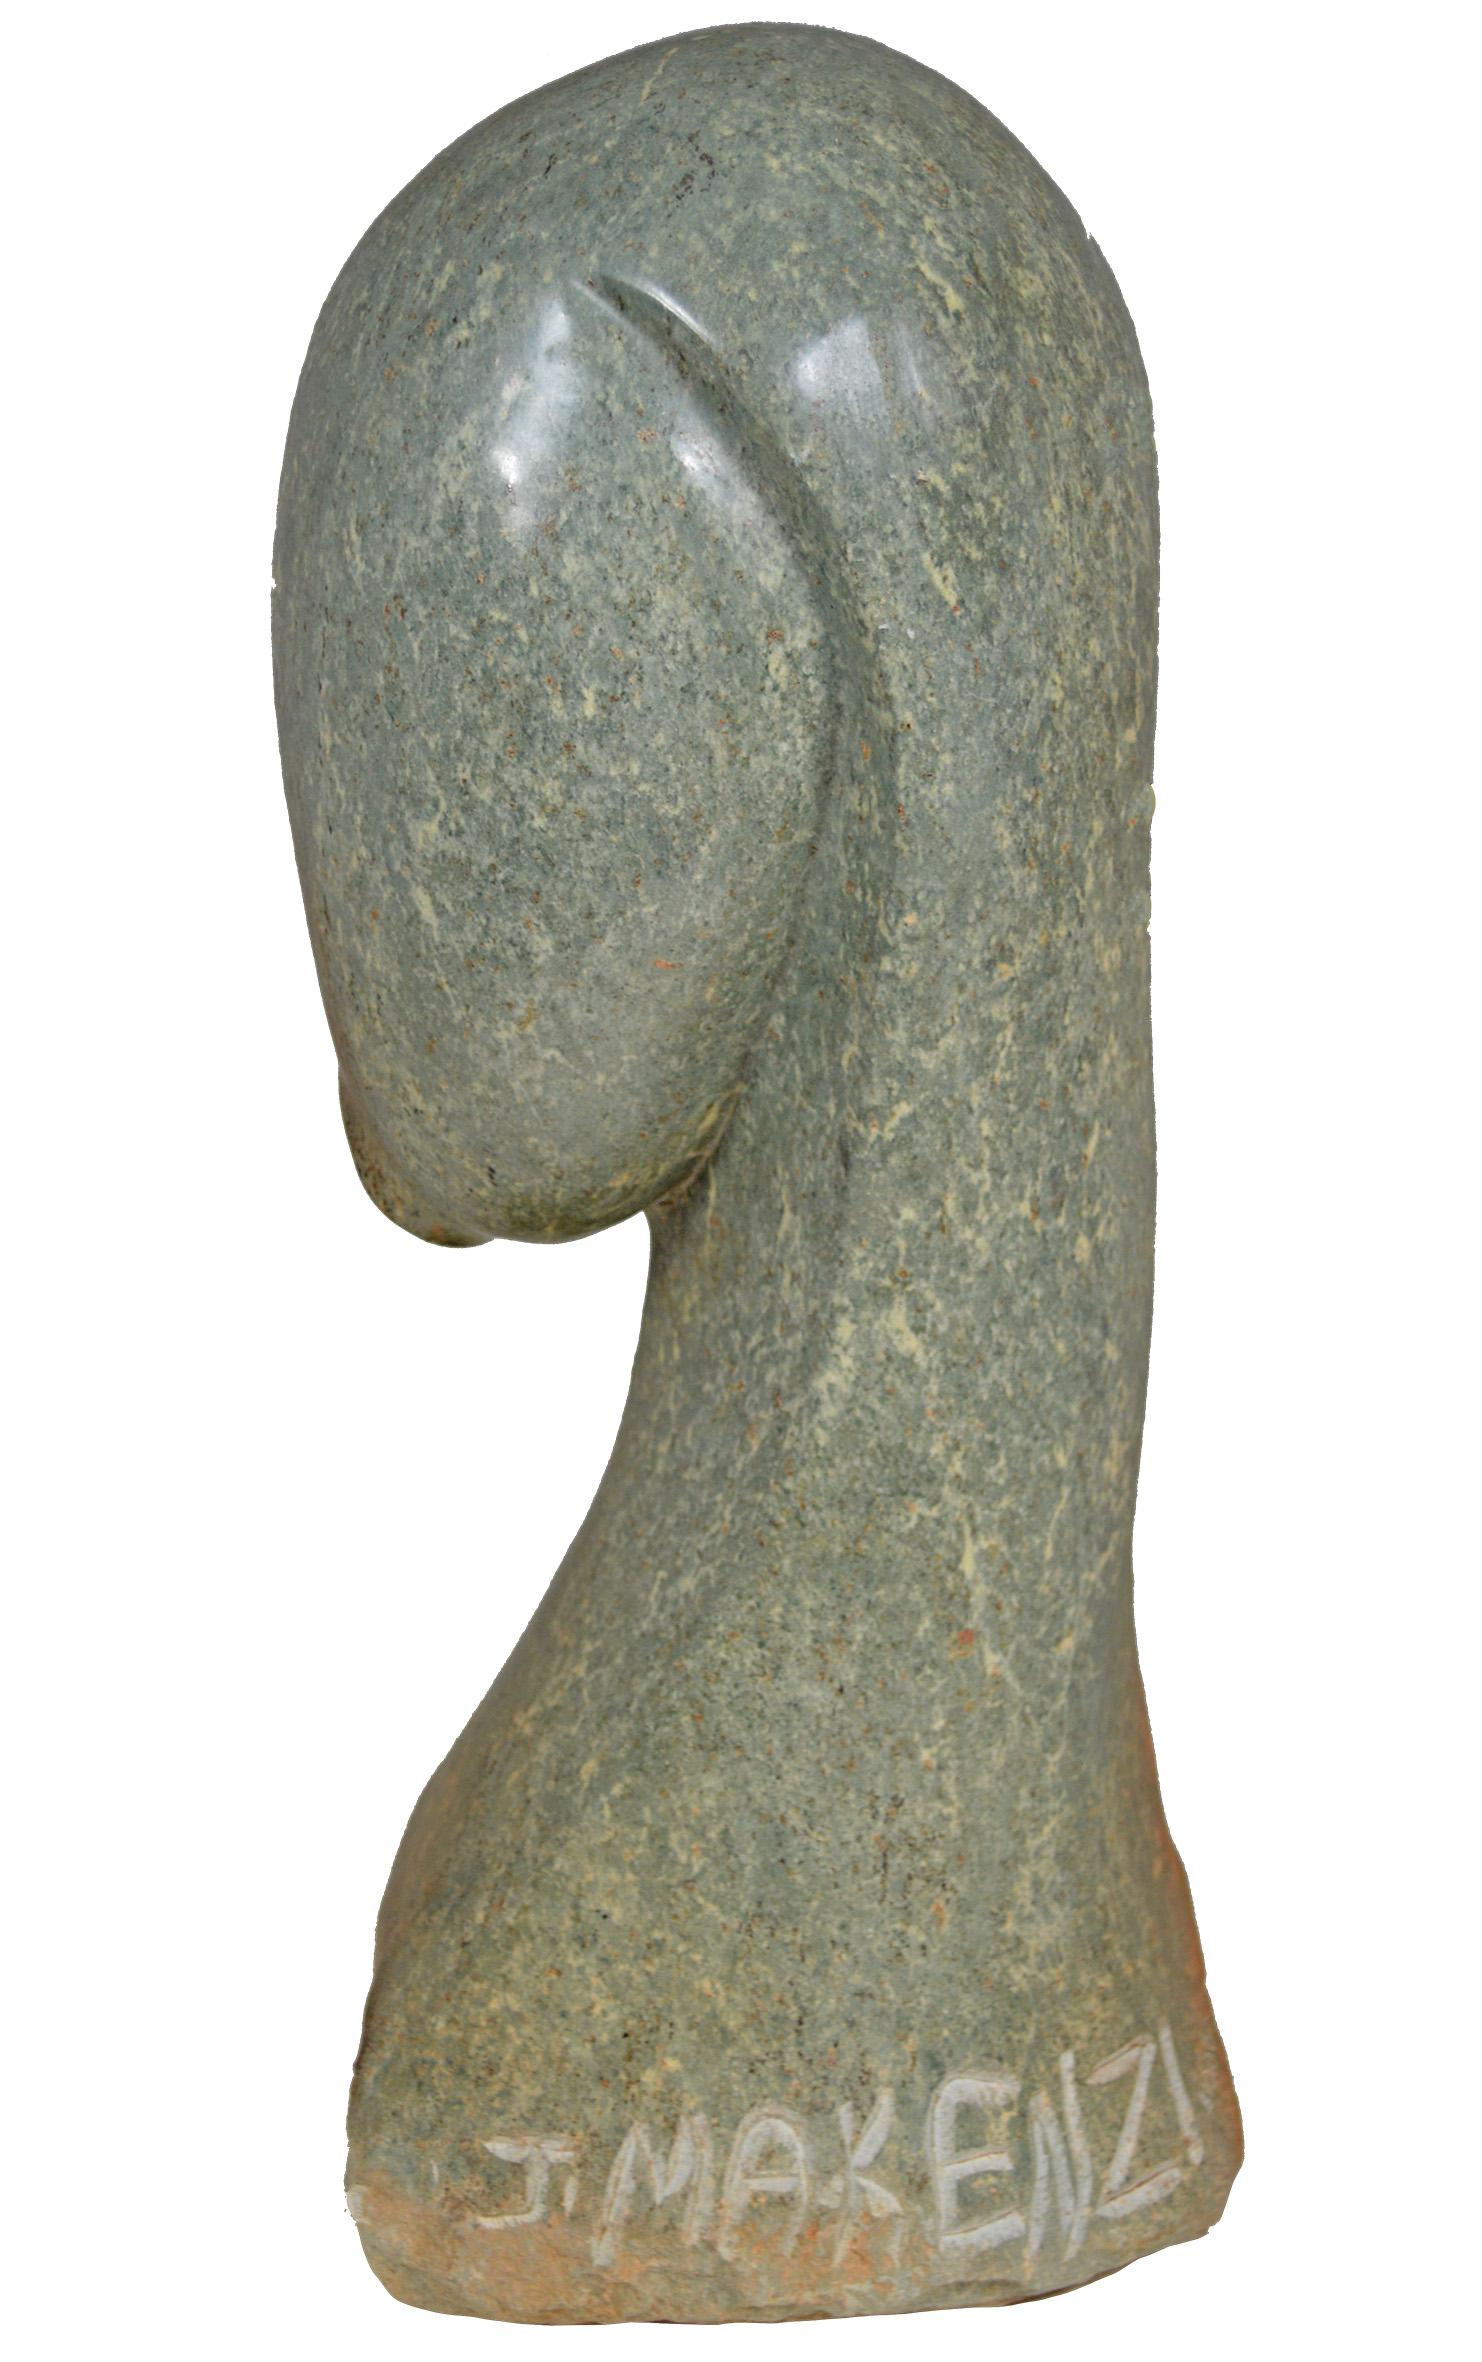 'Eye Witness' is an original opal serpentine sculpture signed by the Zimbabwean artist Josphat Makenzi. Makenzi was trained in the contemporary Shona stone carving tradition, and thus his works take on themes from African as well as from European